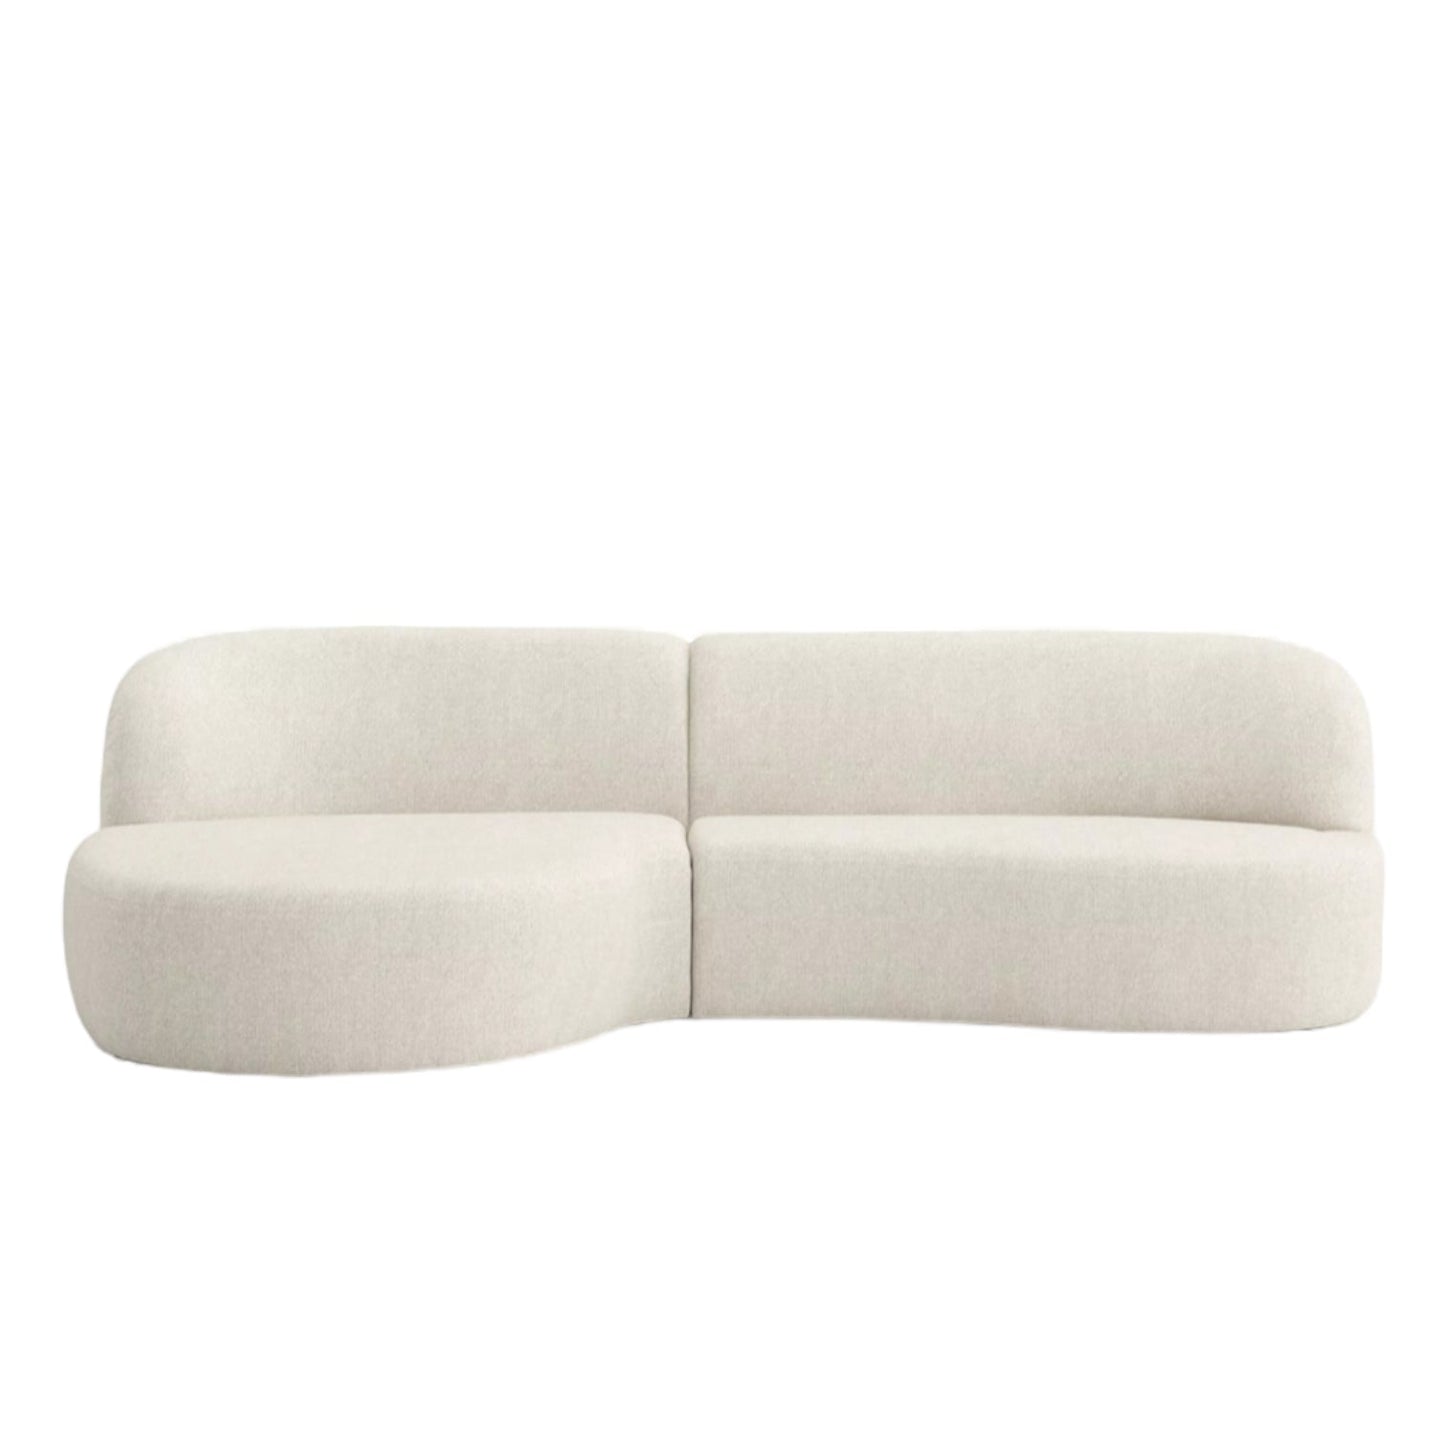 Home Atelier Adell Designer Sectional Round Chaise Sofa